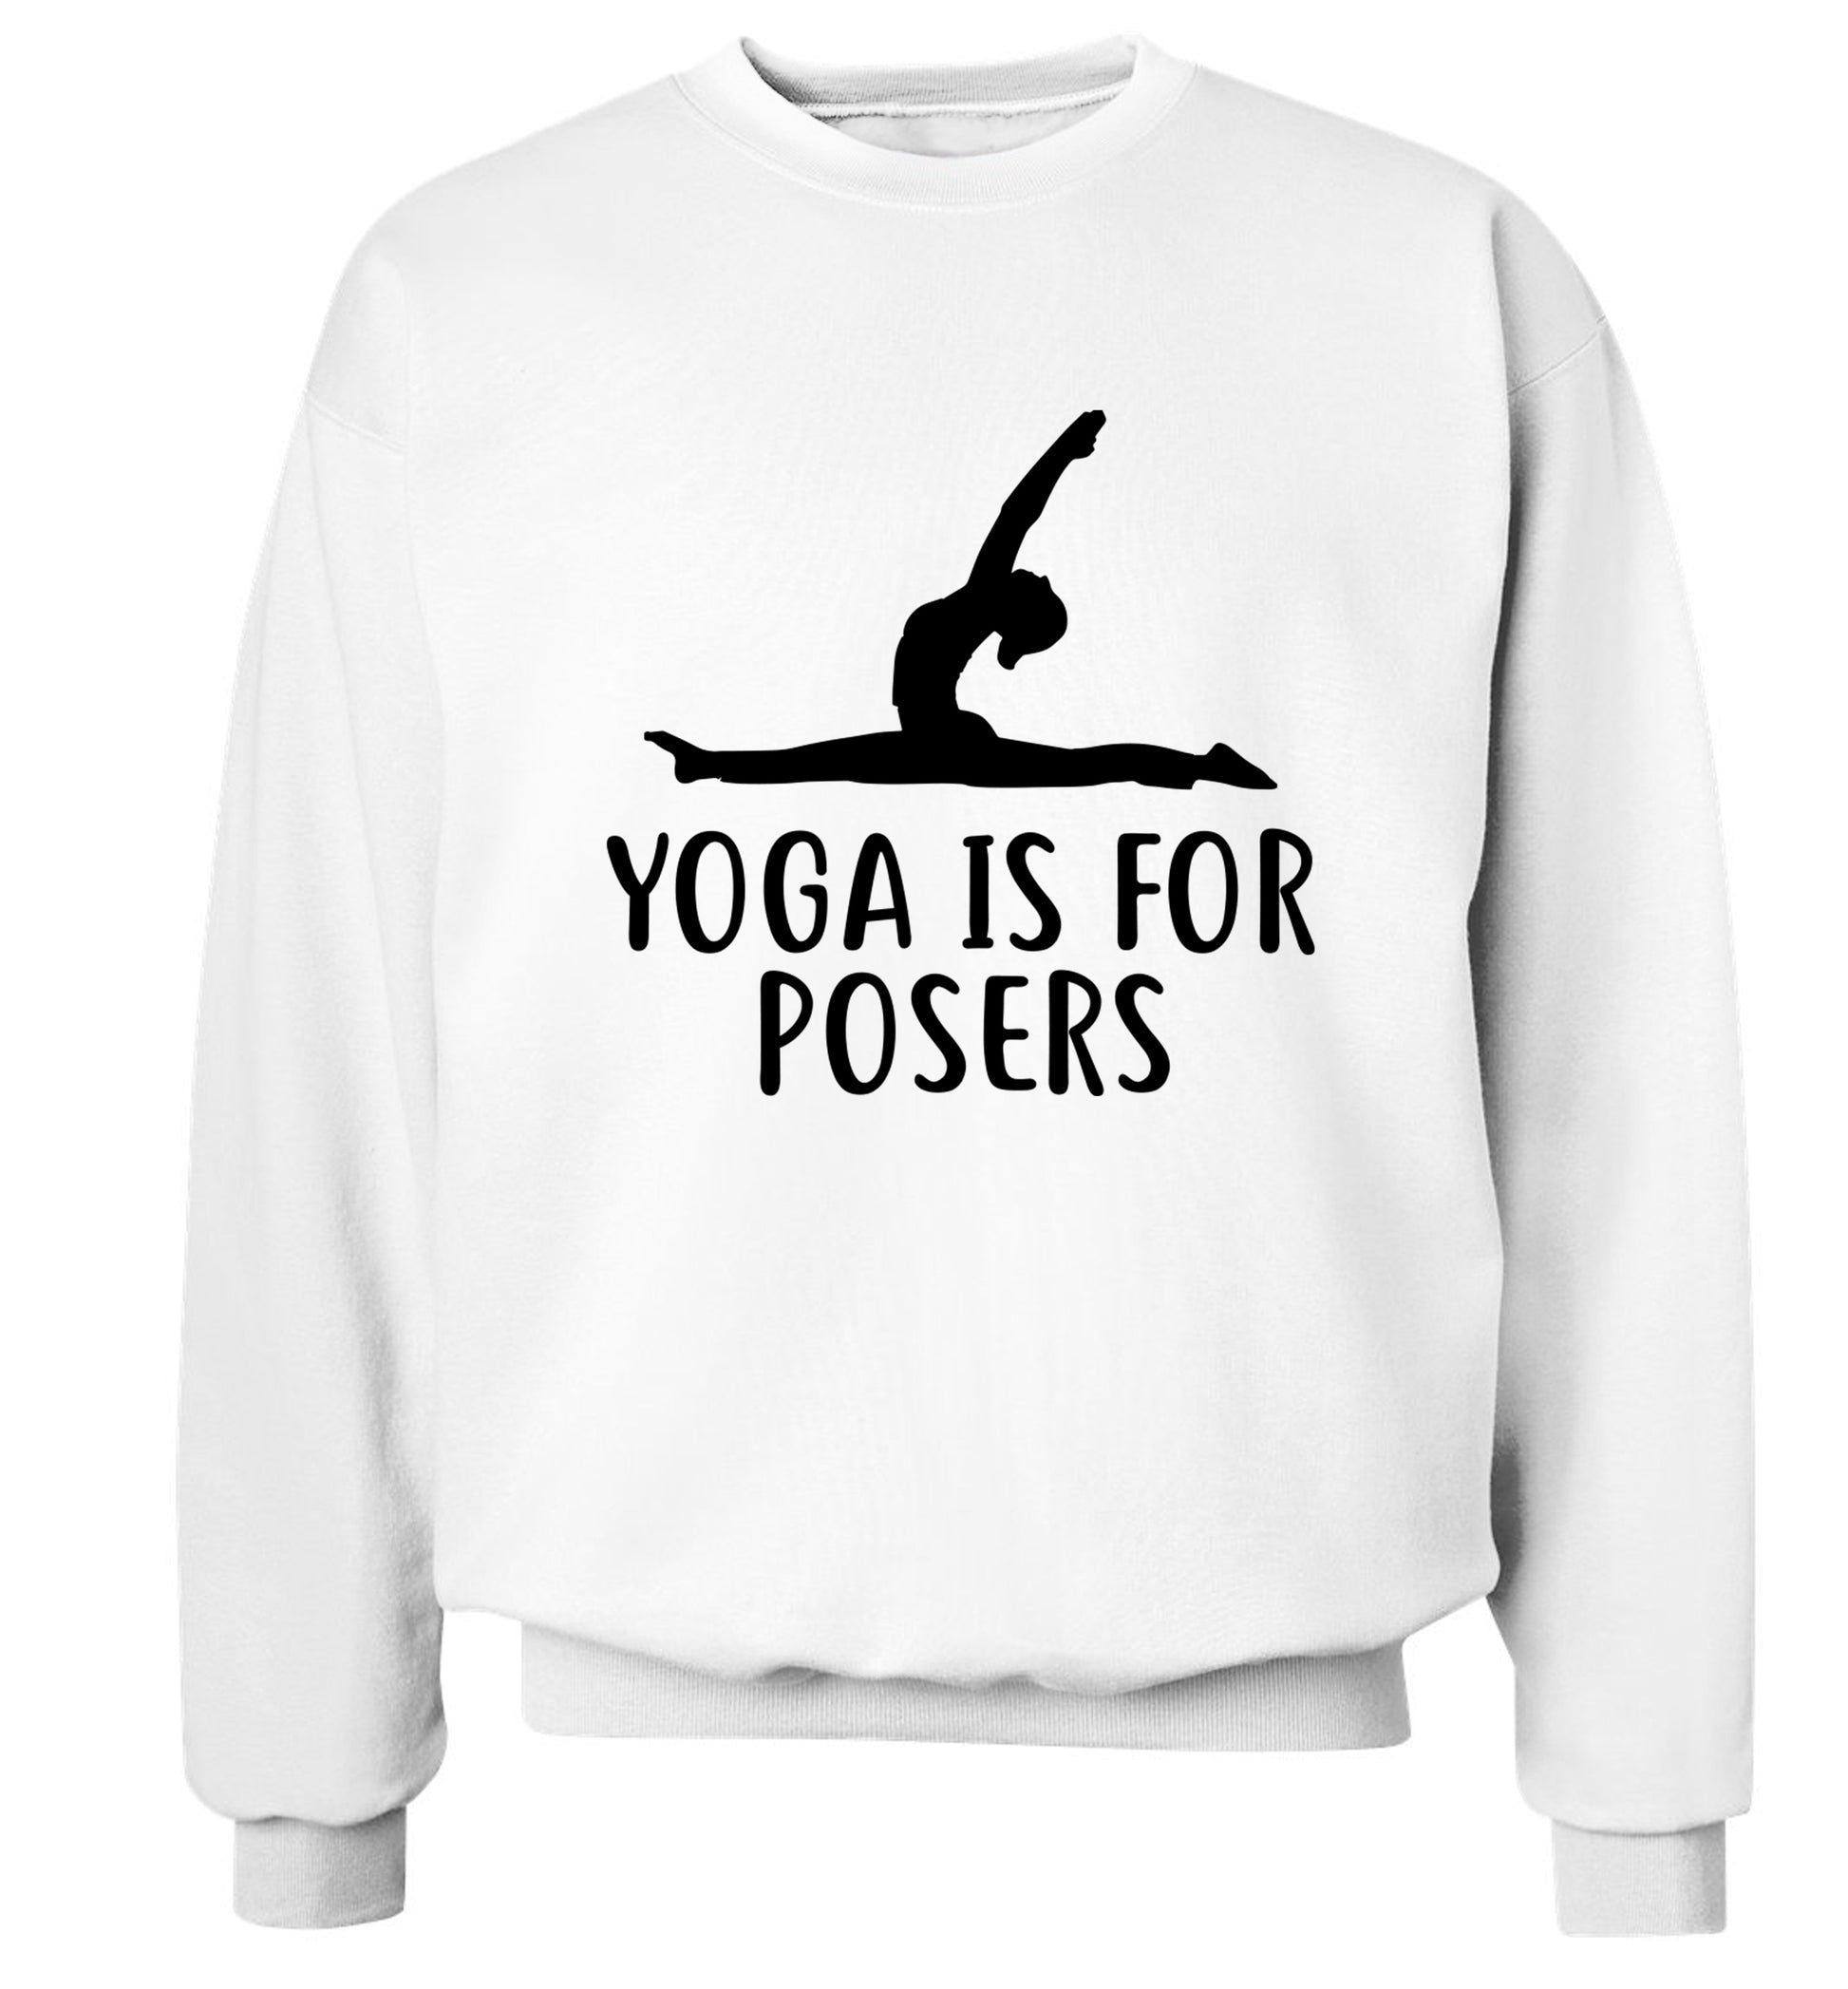 Yoga is for posers Adult's unisex white Sweater 2XL